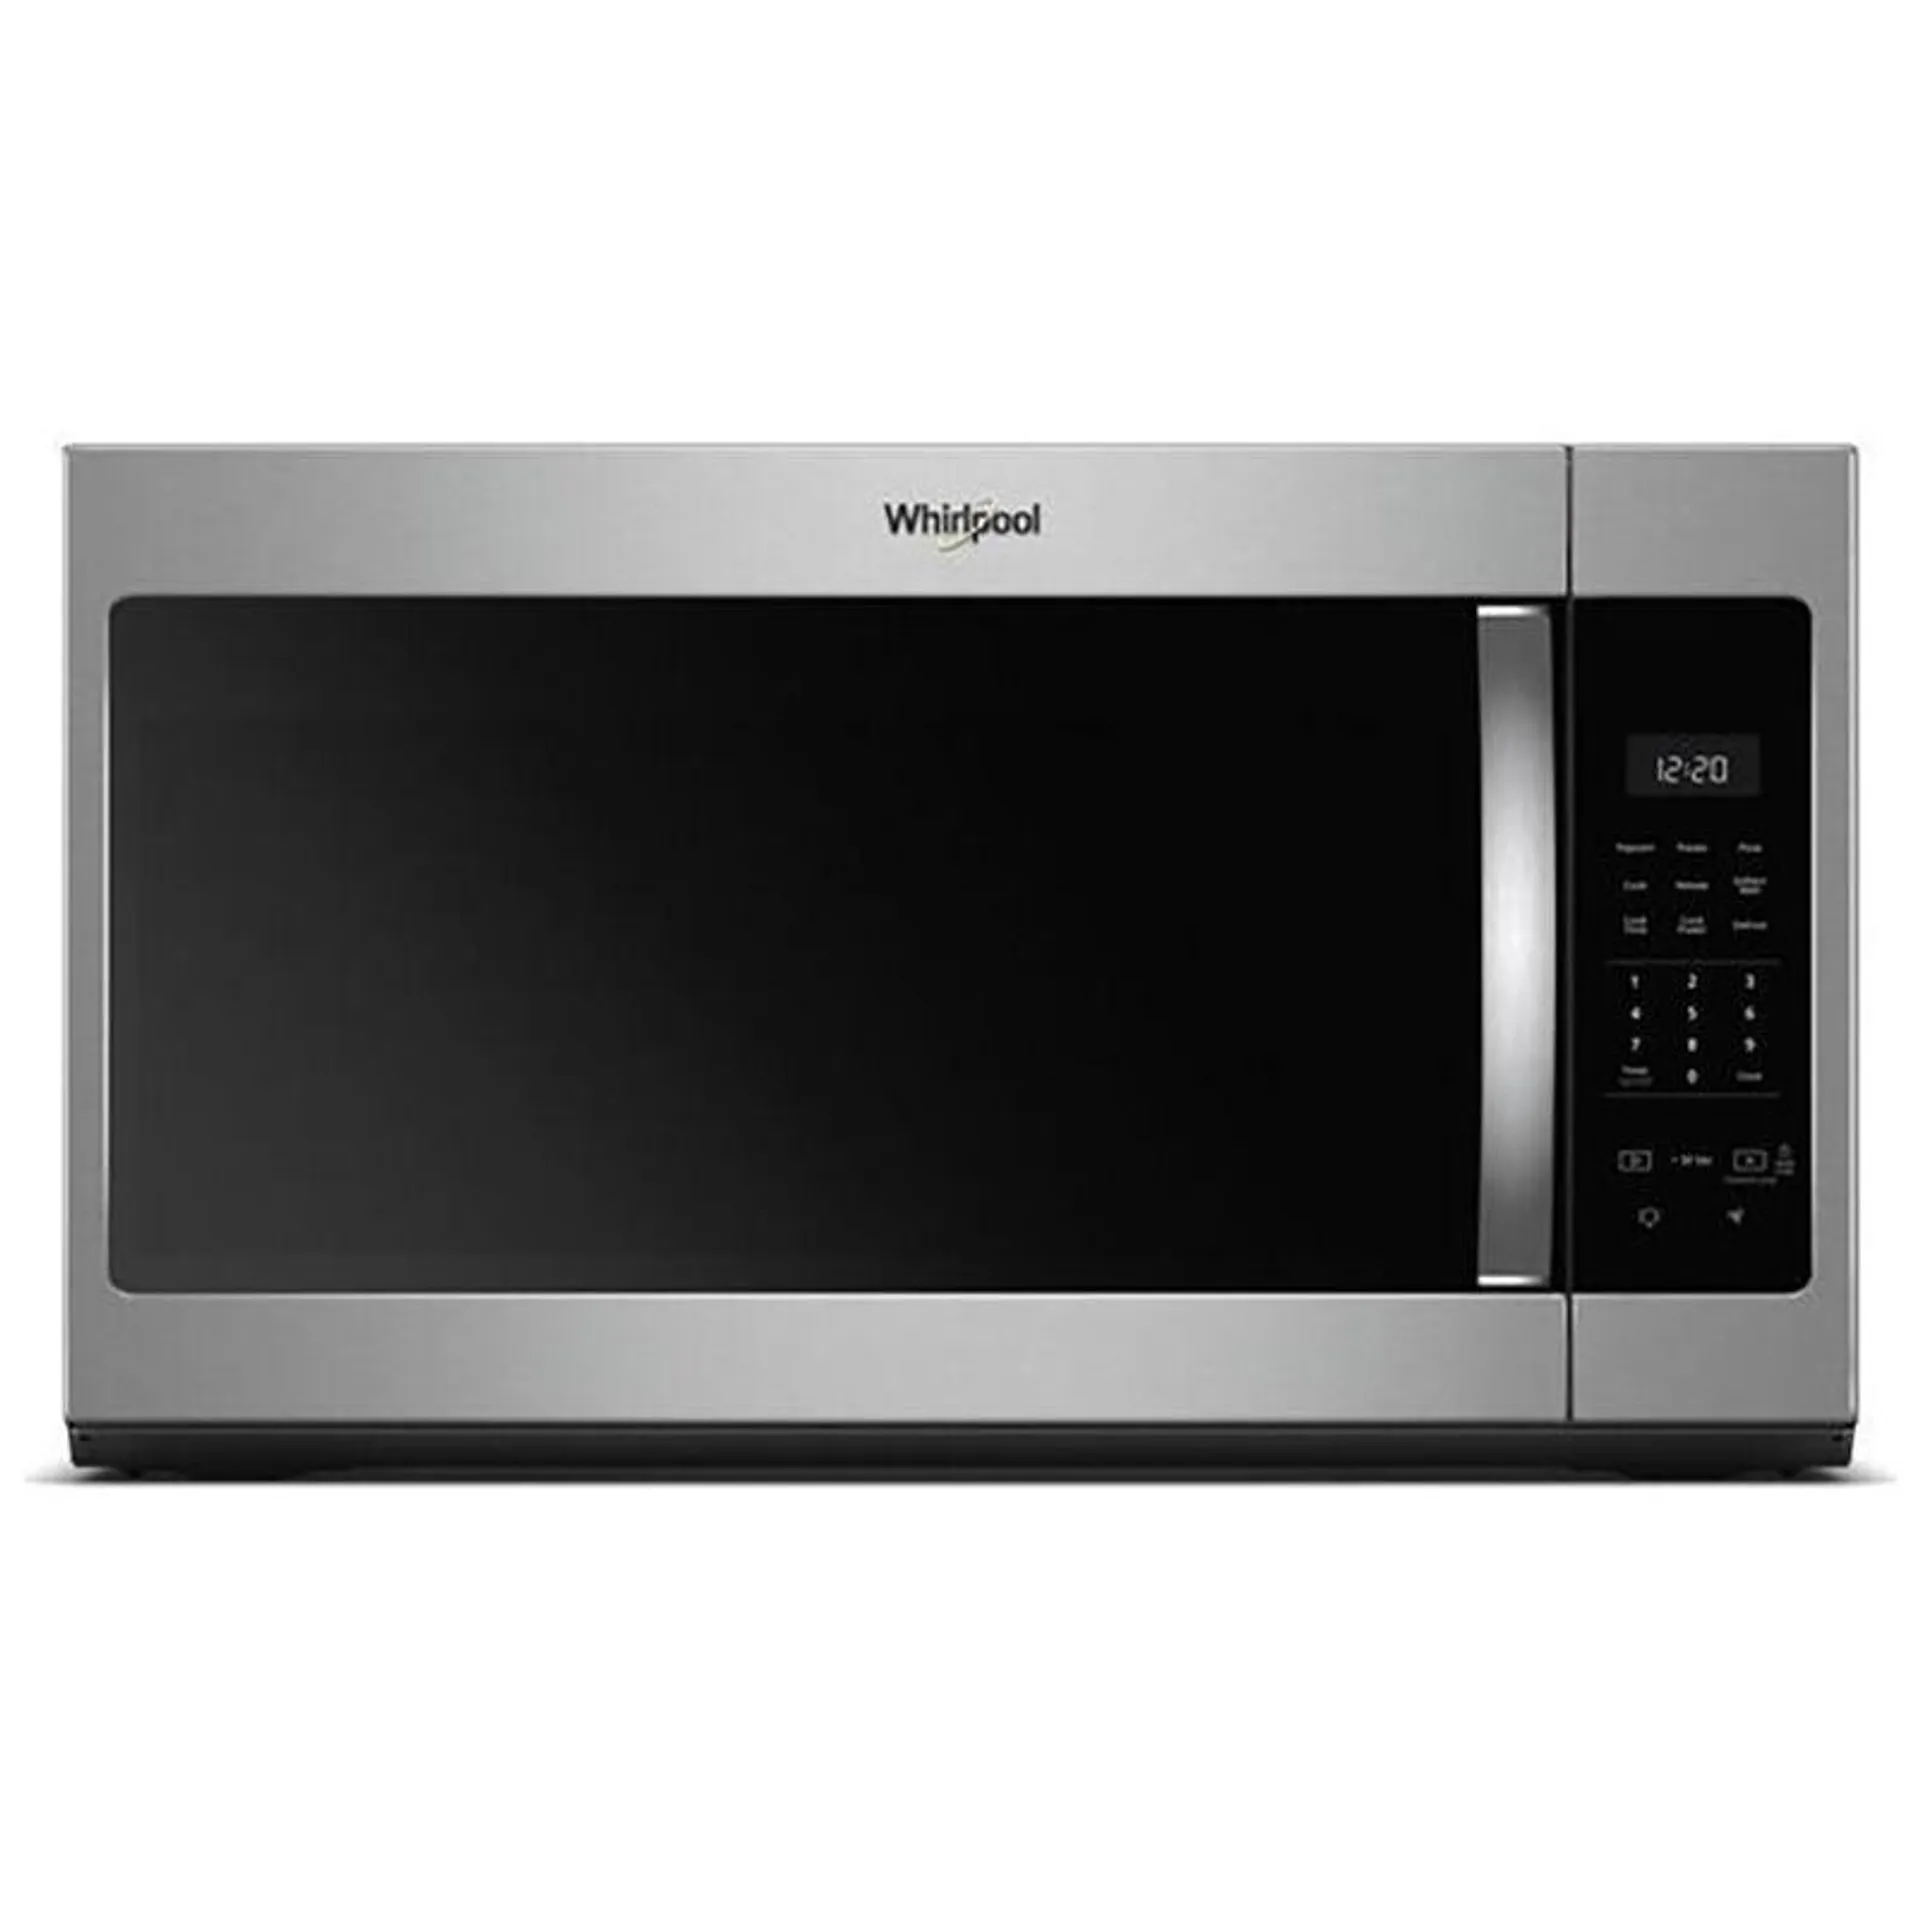 Whirlpool 30" 1.7 Cu. Ft. Over-the-Range Microwave with 10 Power Levels & 300 CFM - Fingerprint Resistant Stainless Steel